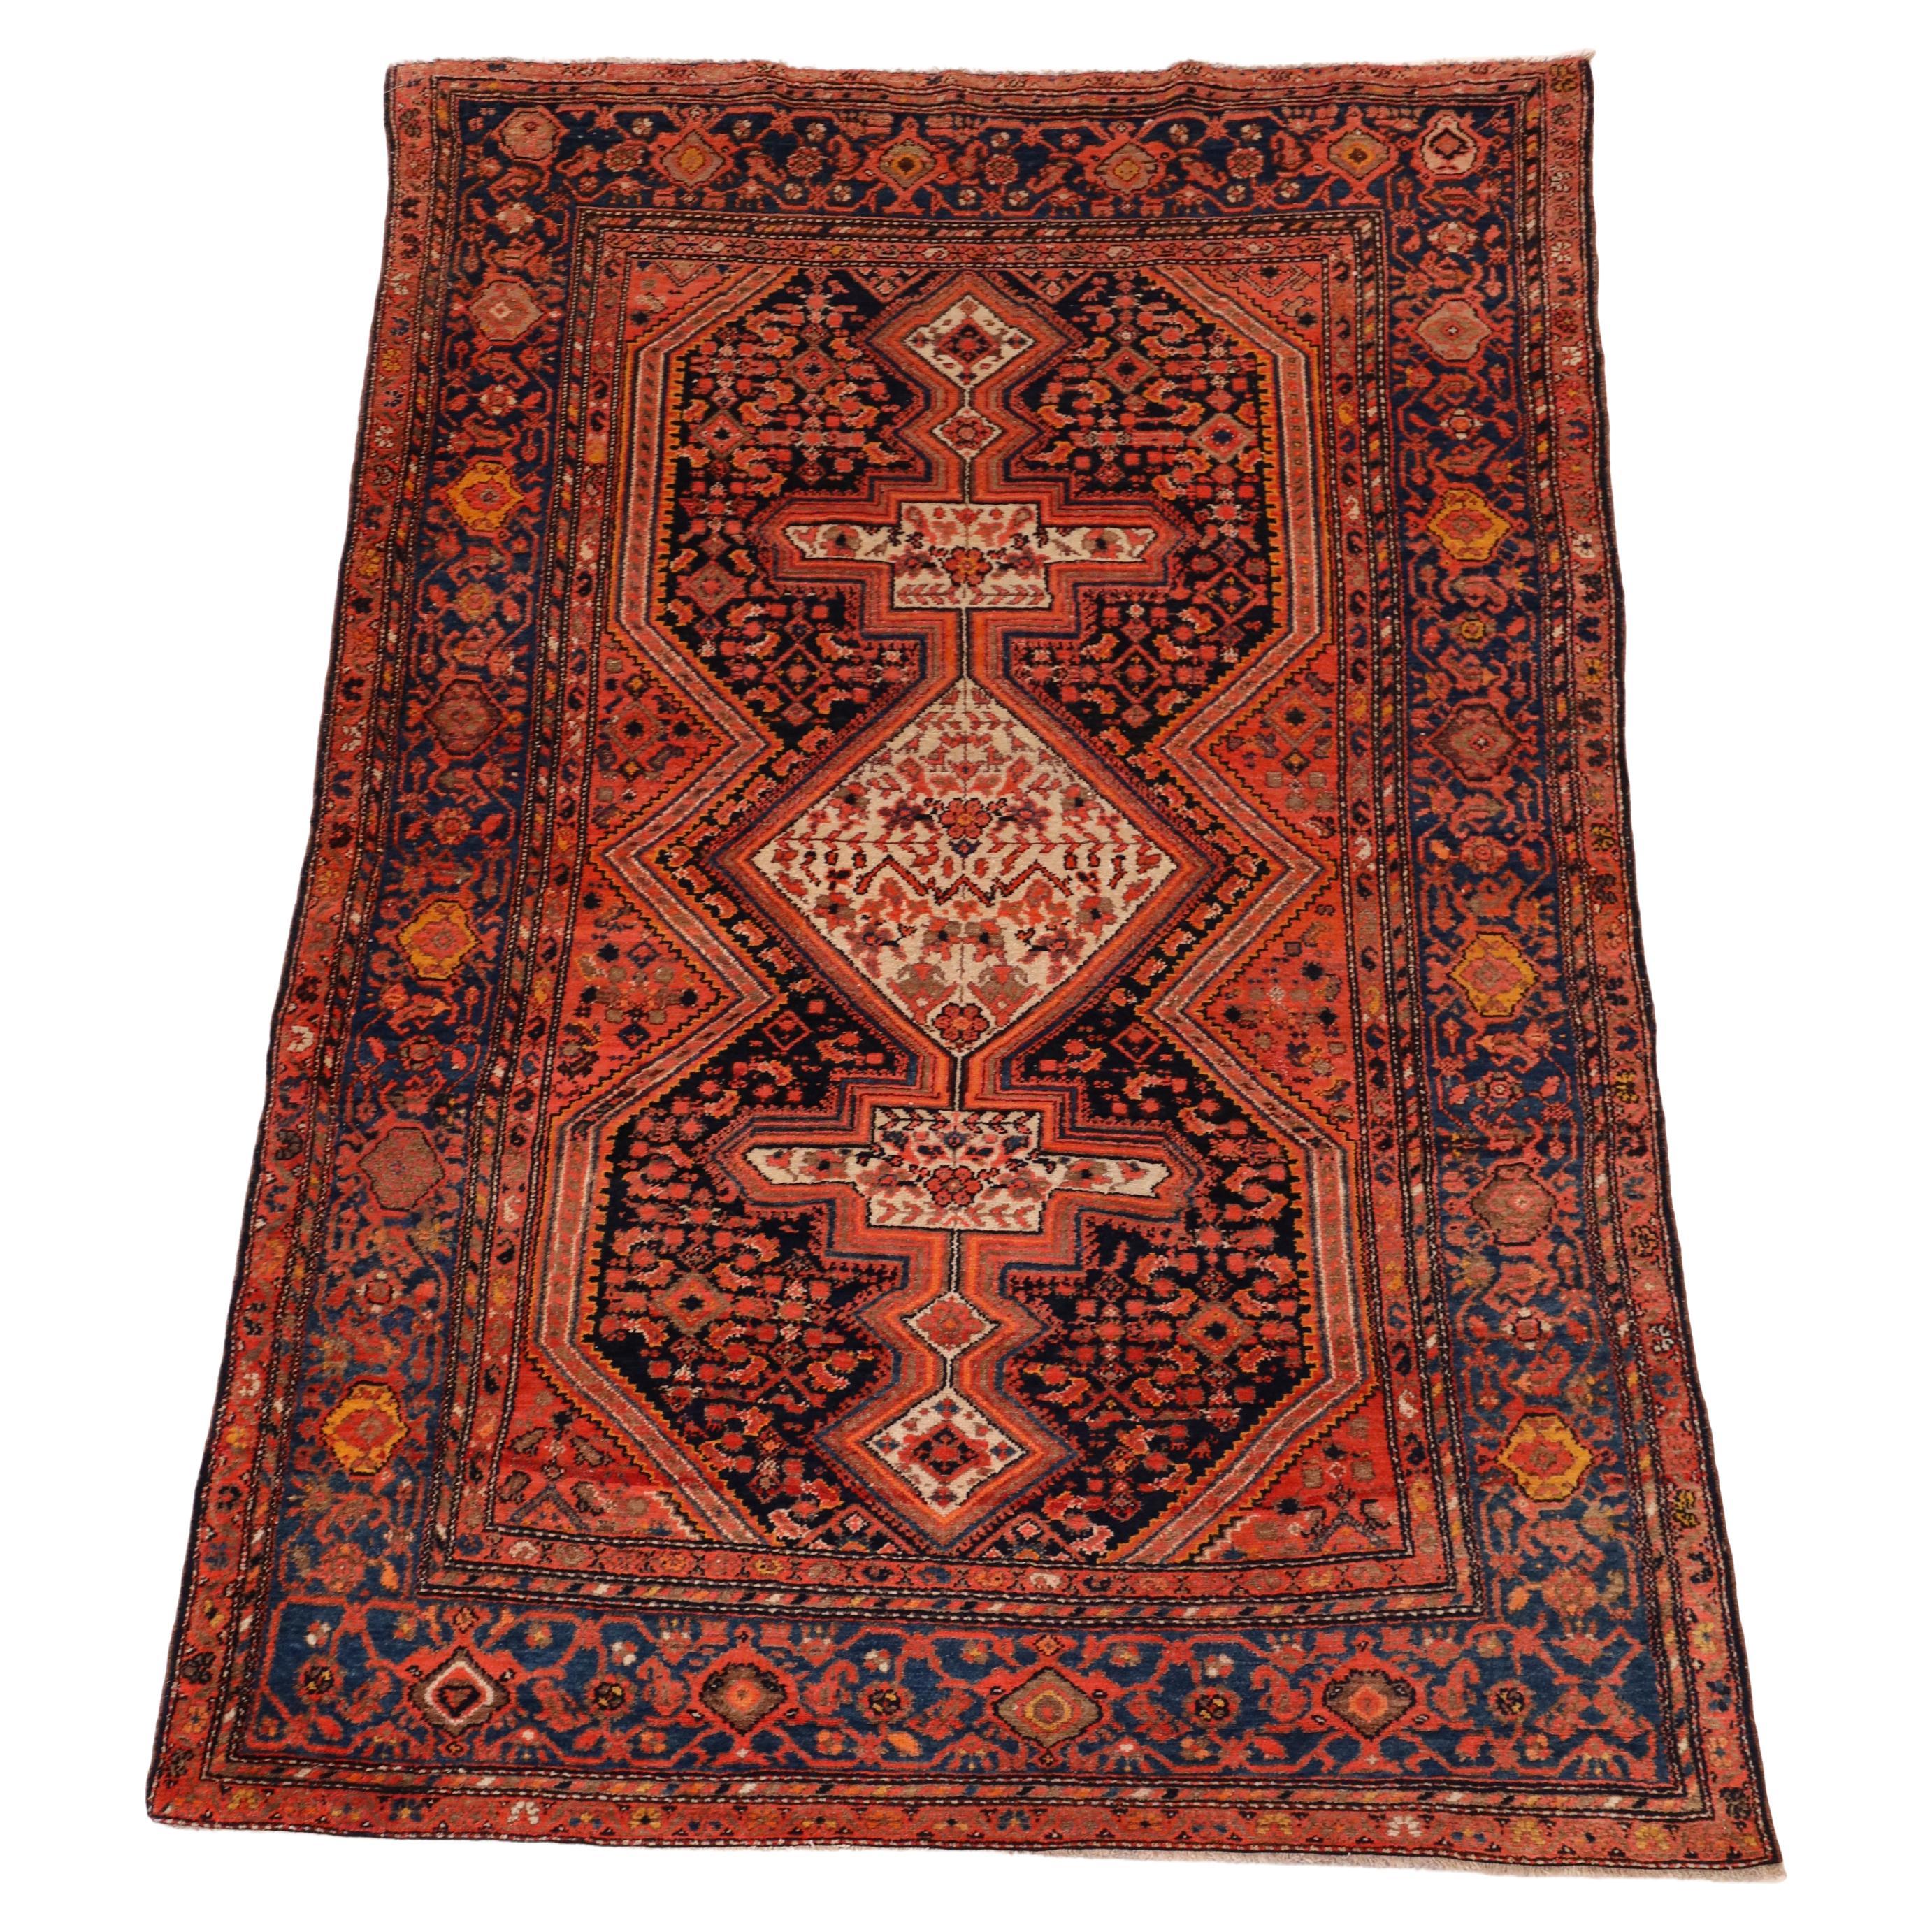 Malayer Antique Rug, Red Ivory - 4'6" x 6'7"